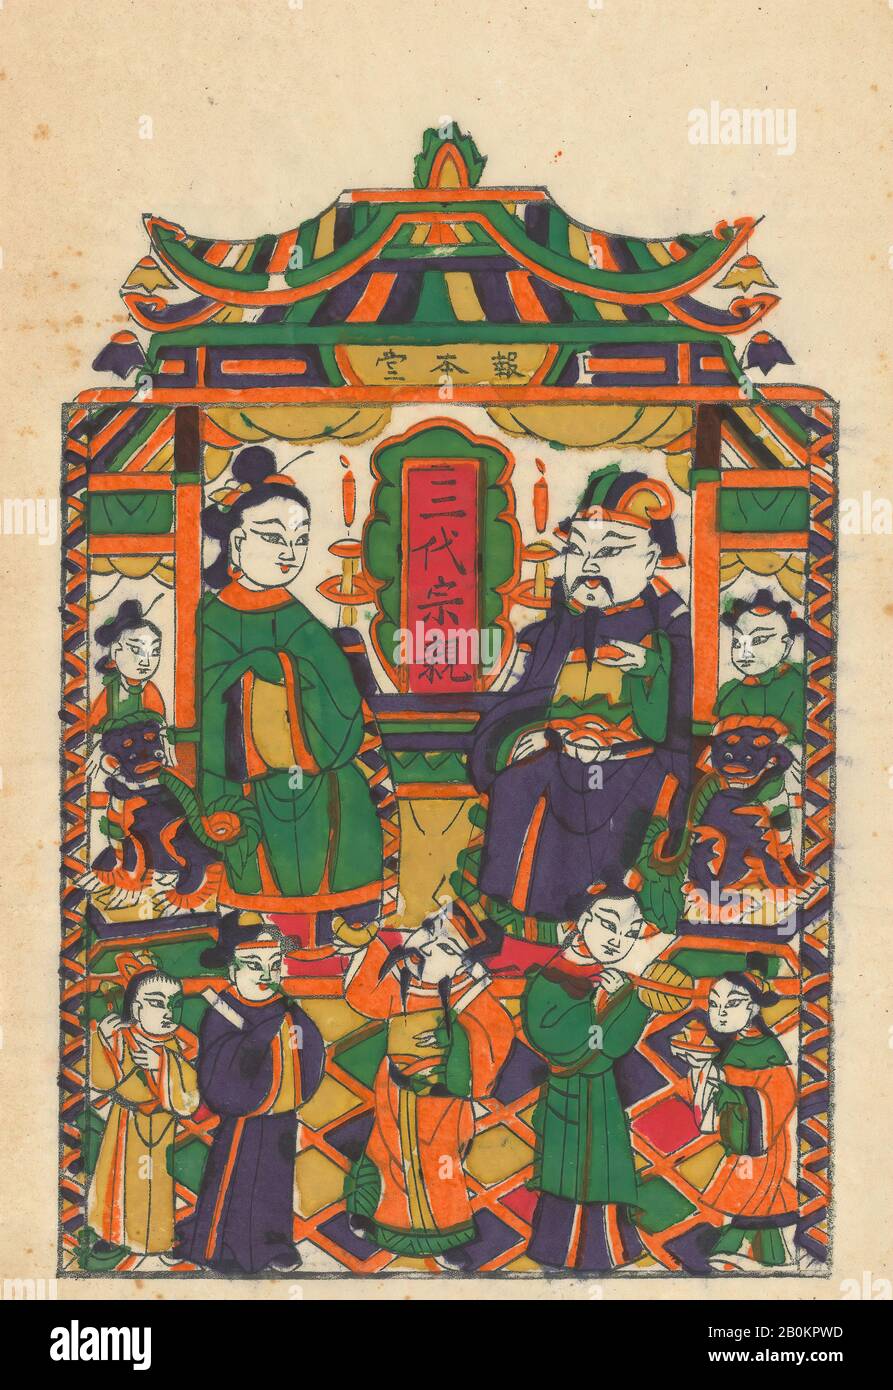 One hundred thirty-five woodblock prints including New Year's pictures (nianhua), door gods, historical figures and Taoist deities, China, 19th–20th century, China, Polychrome woodblock print; ink and color on paper, Image: 16 1/4 in. × 10 in. (41.3 × 25.4 cm), Prints Stock Photo